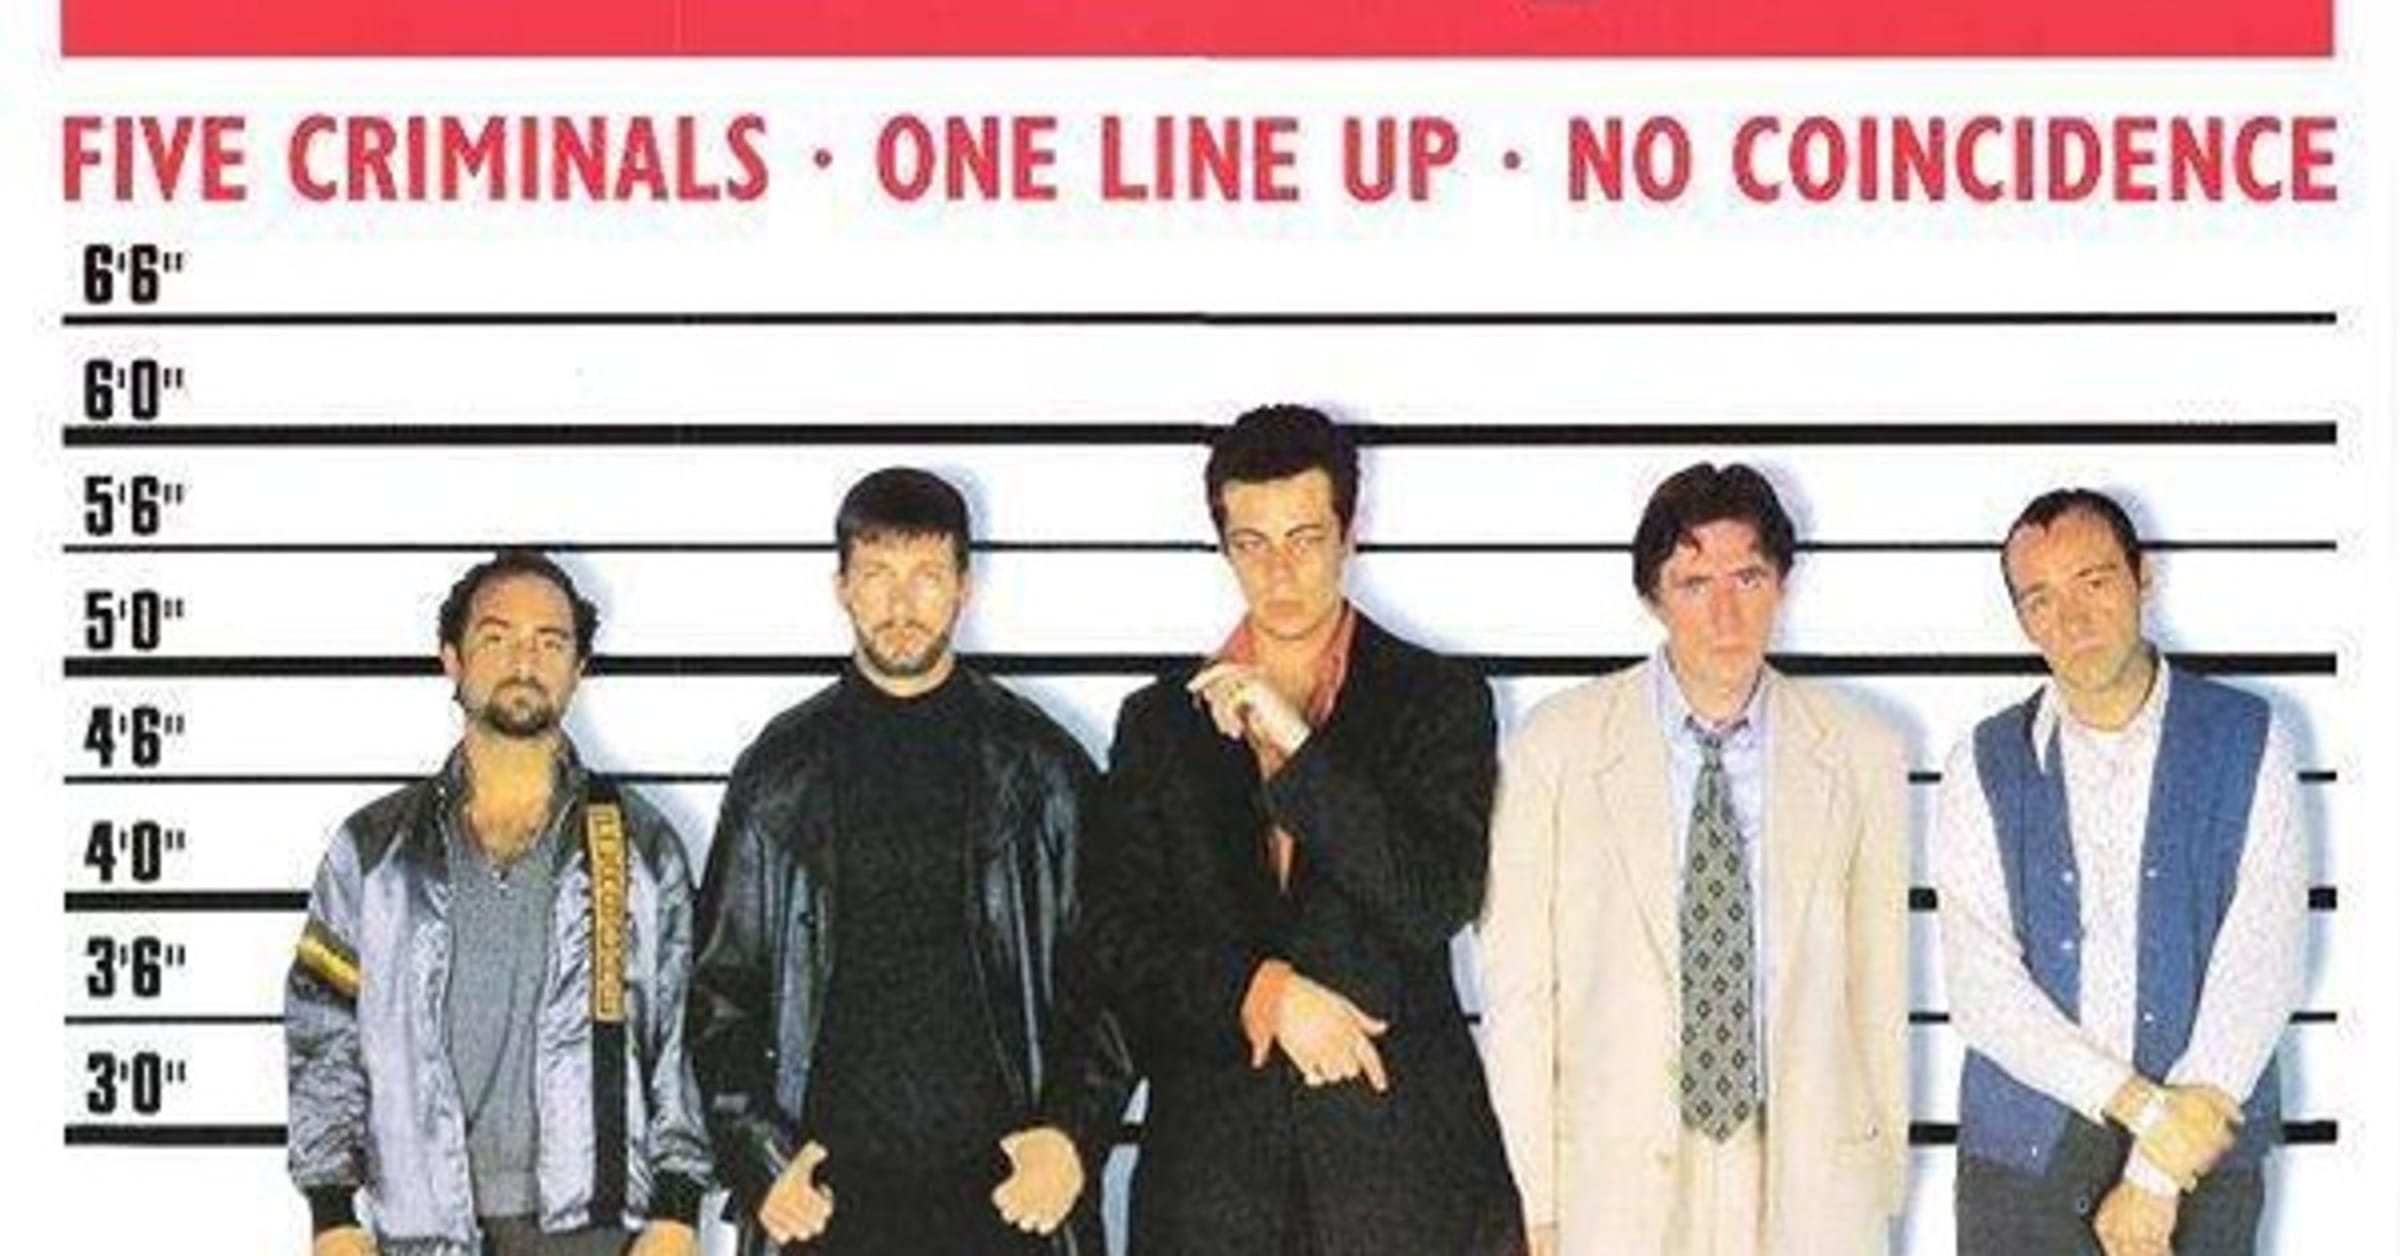 The Usual Suspects (1995) - Quotes - IMDb